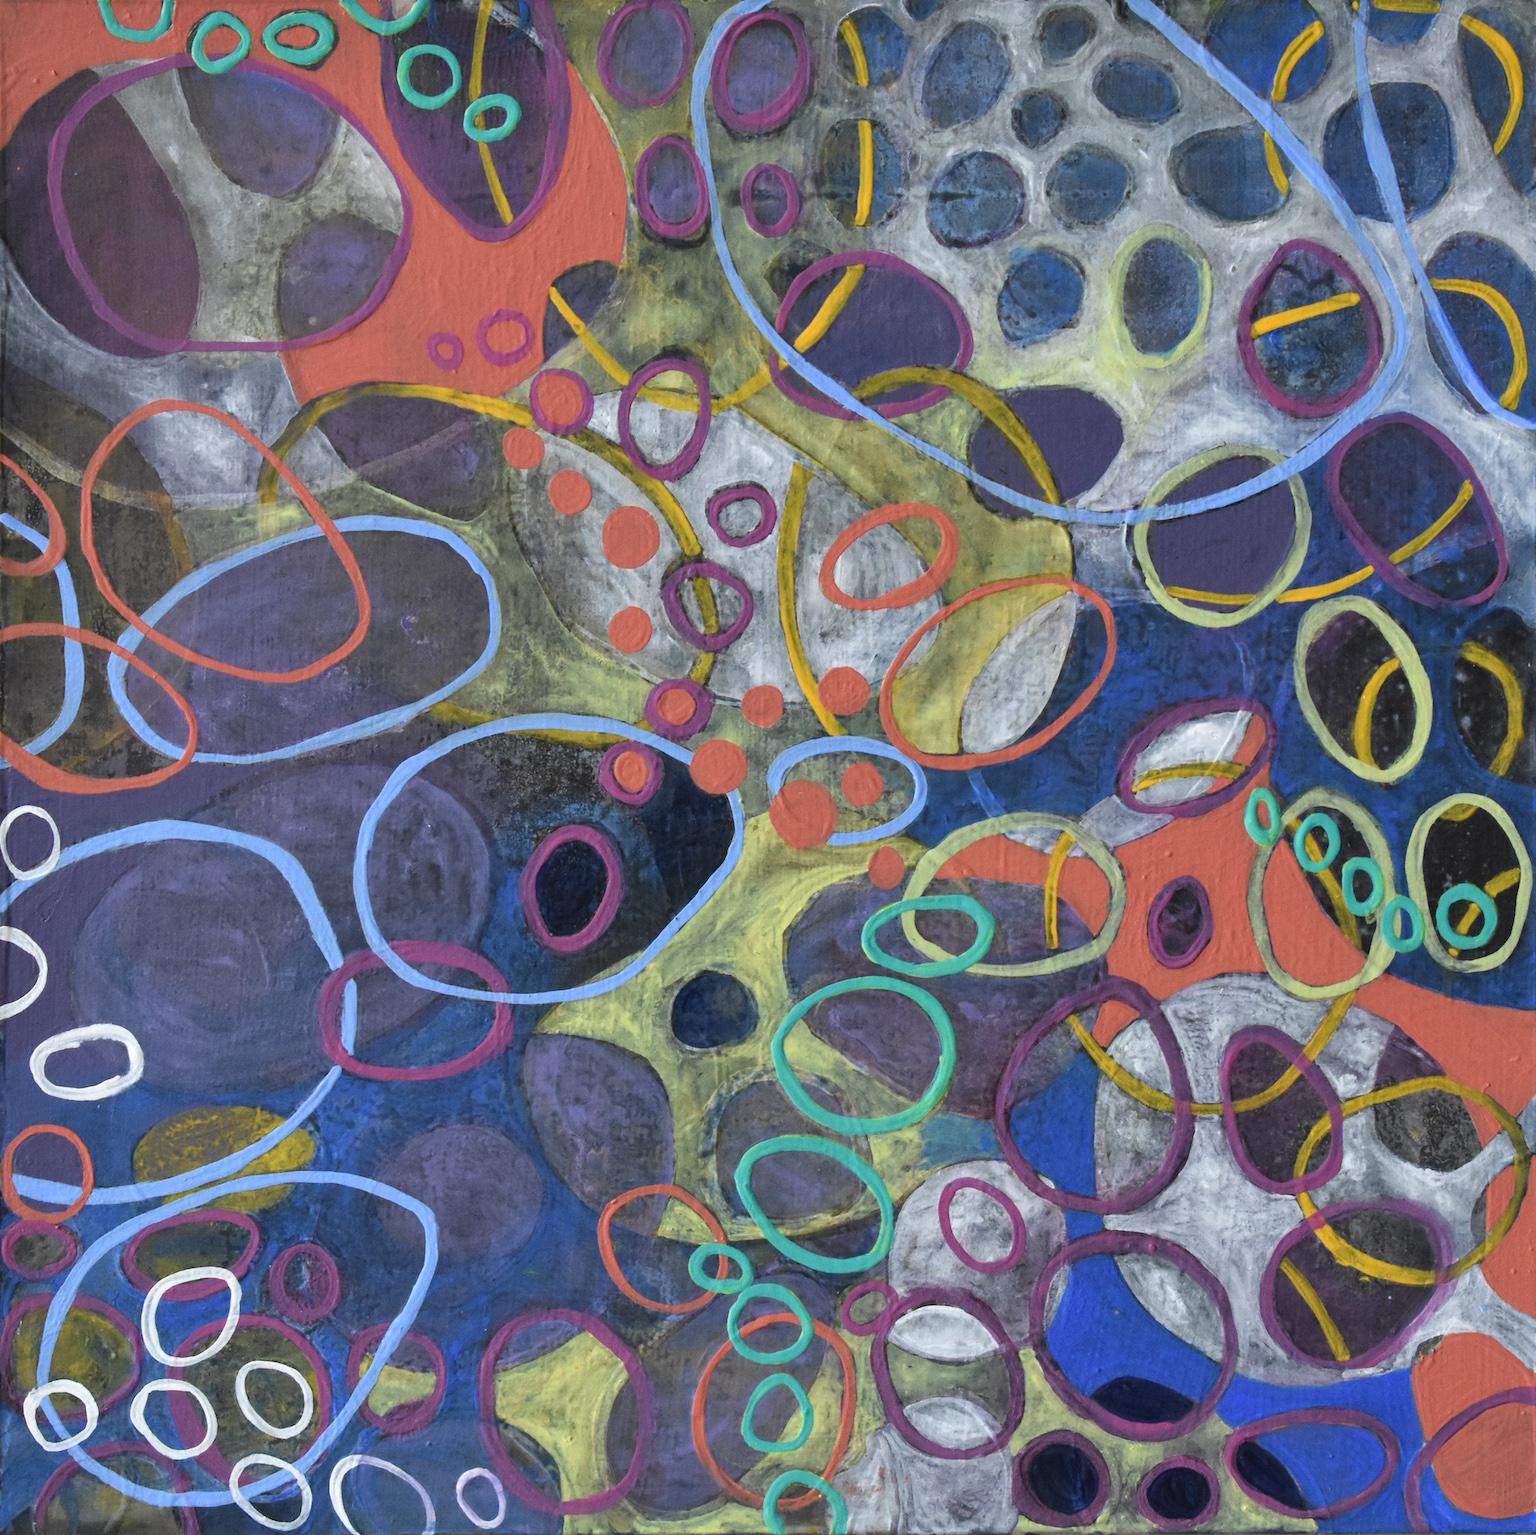 "String Theory 4", abstract, gray, blue, orange, yellow, green, acrylic painting - Painting by Denise Driscoll